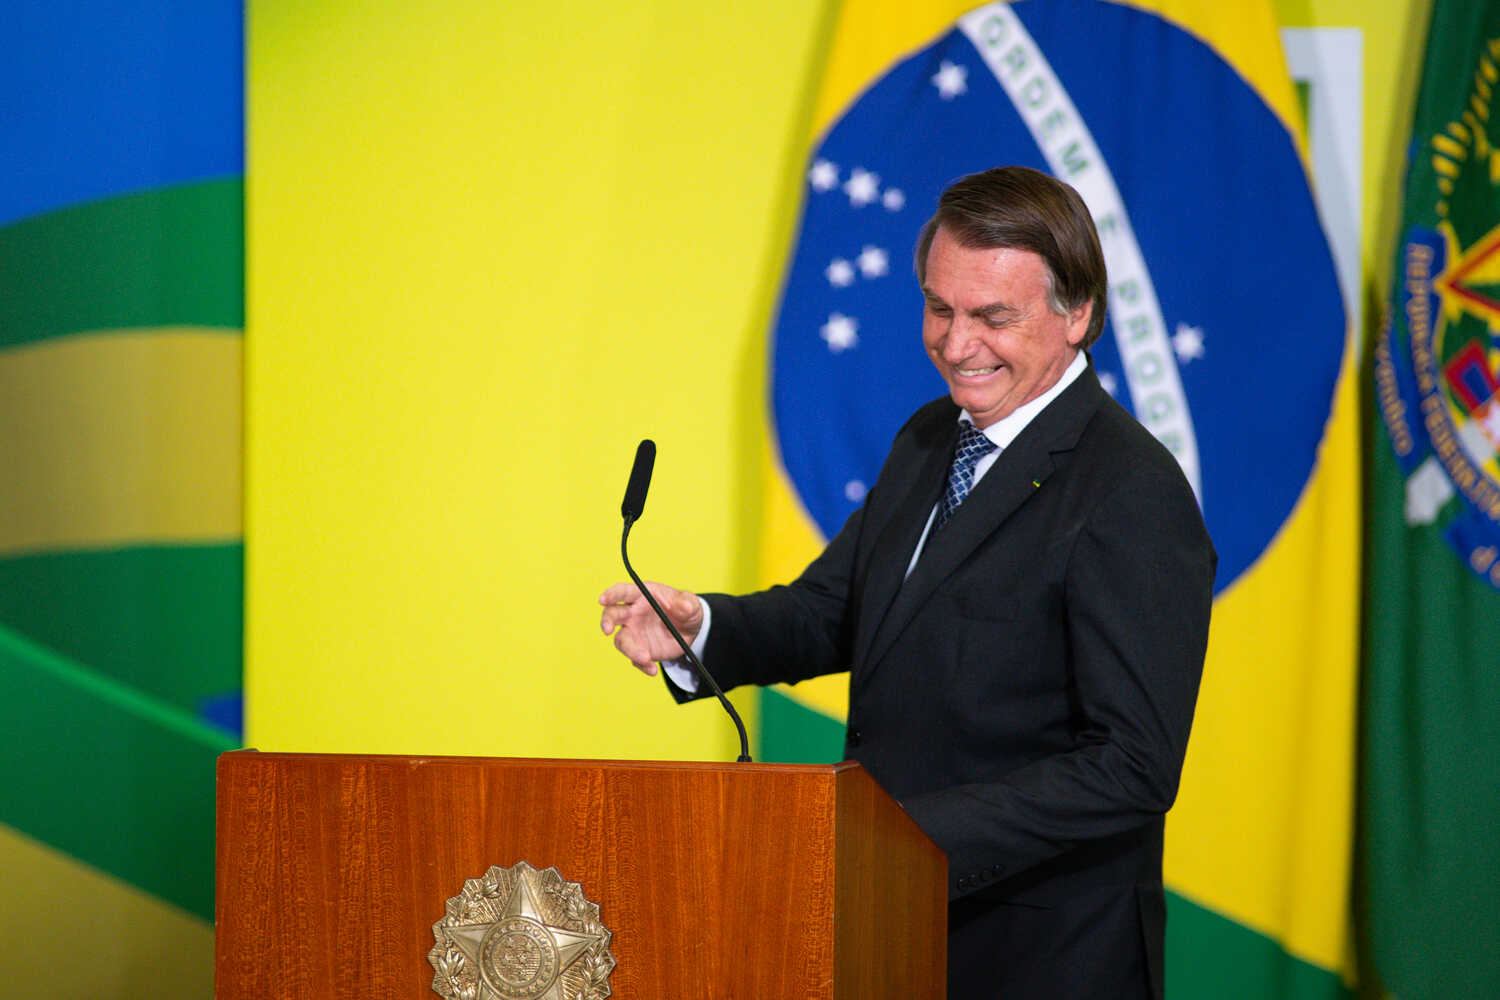 Brazilian President Jair Bolsonaro has joined the Liberal Party ahead of the country's presidential election next year.